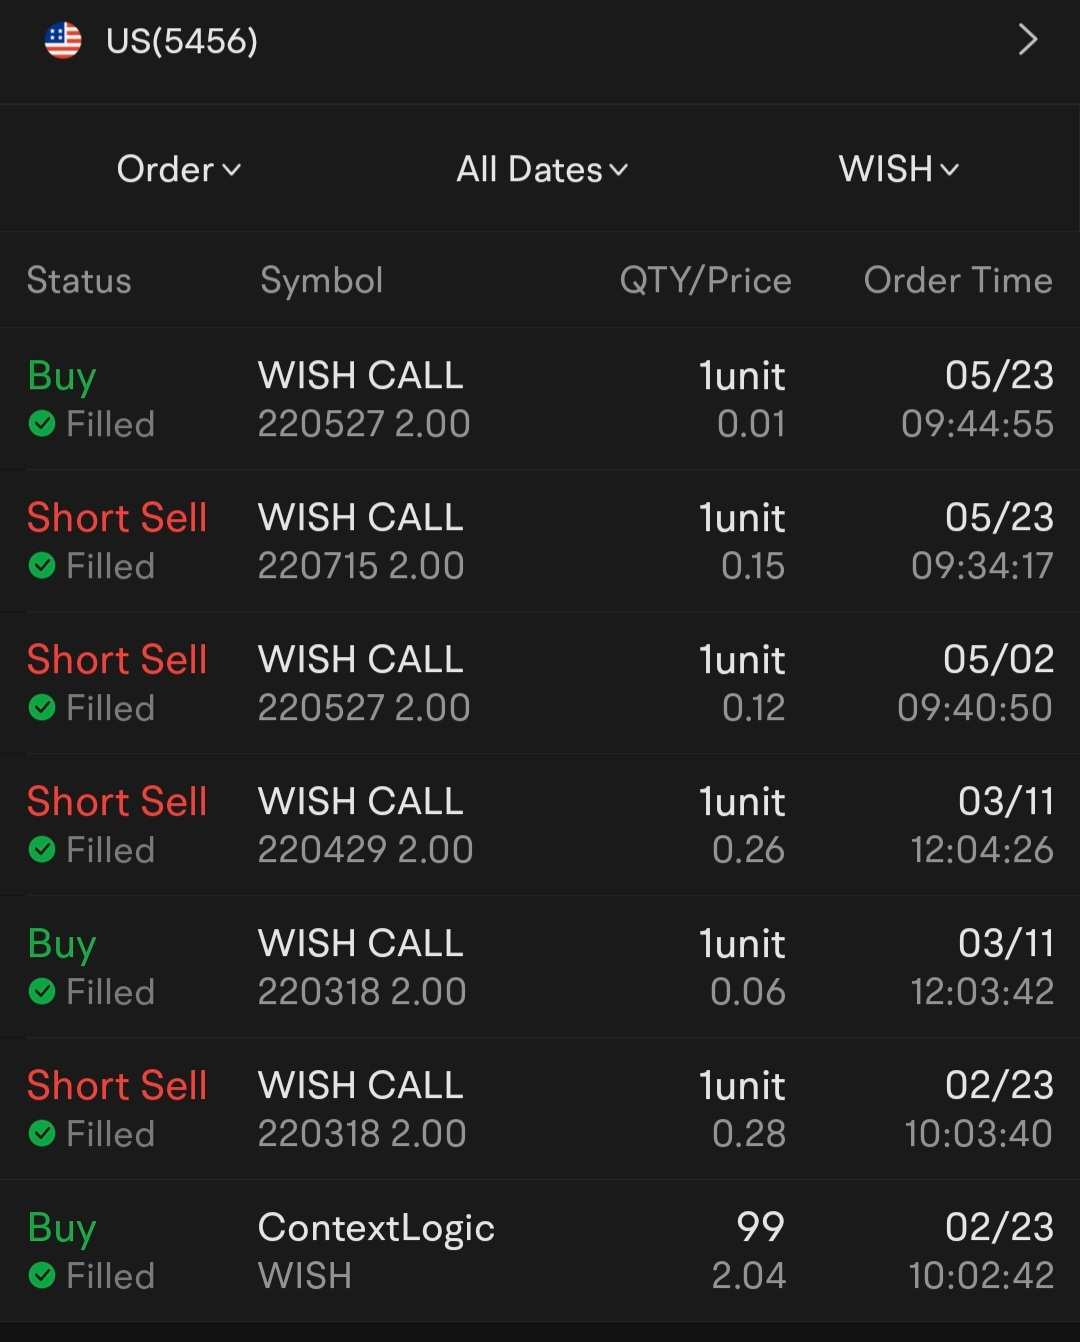 Turned a 37% loss into 44% gain in a bear market using covered calls